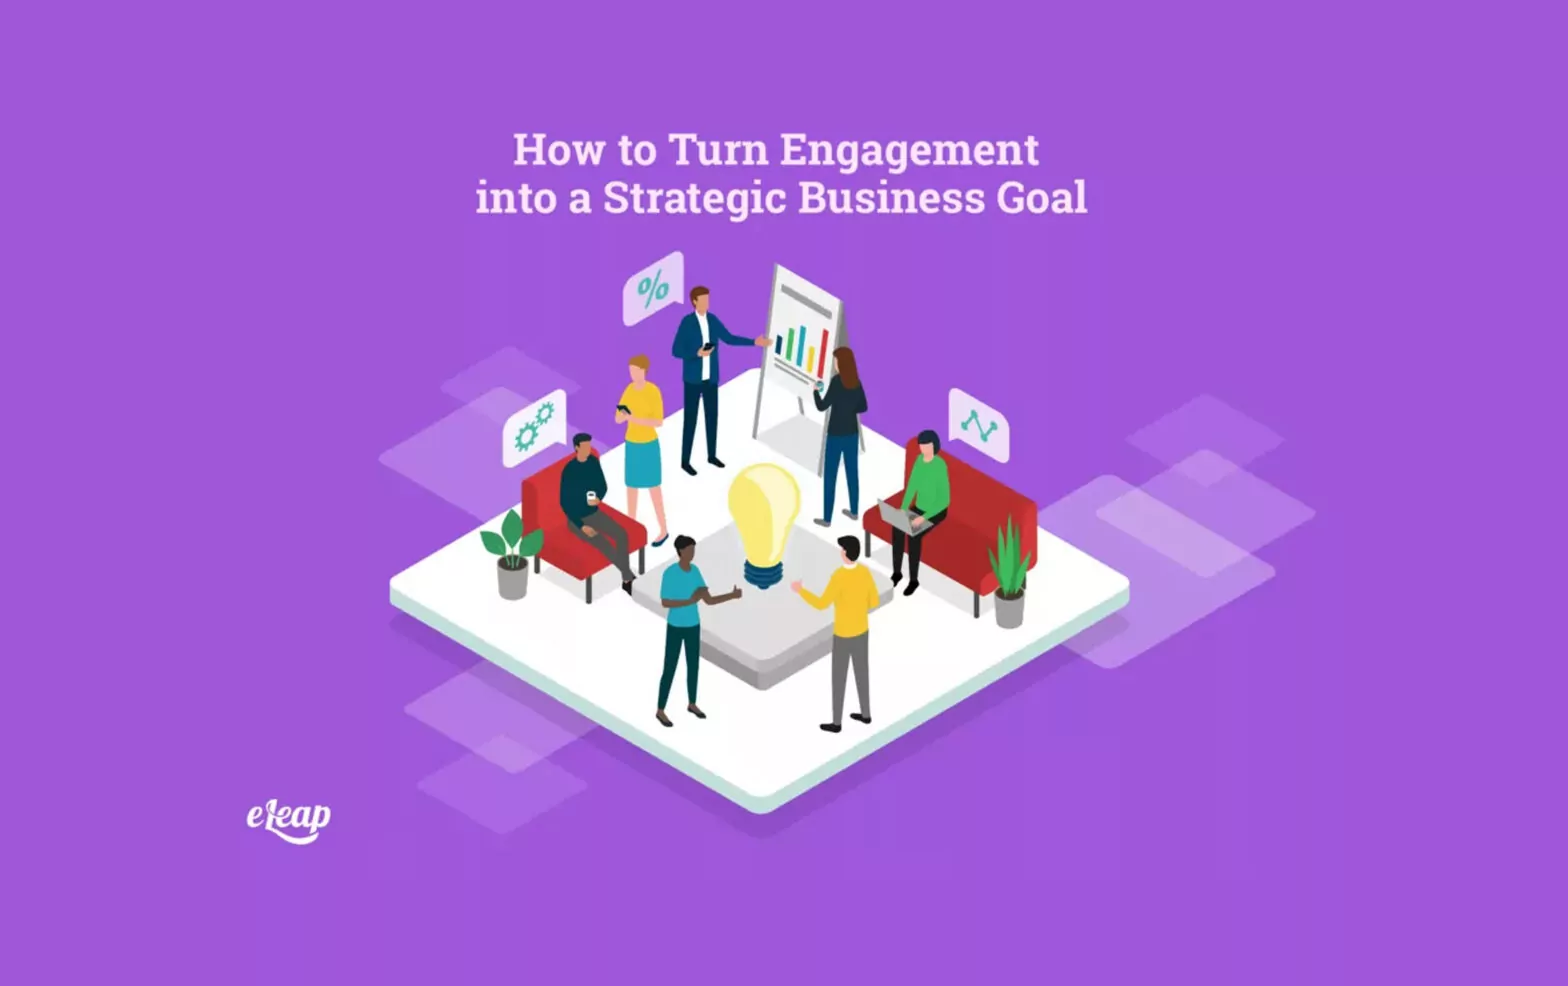 How to Turn Engagement into a Strategic Business Goal